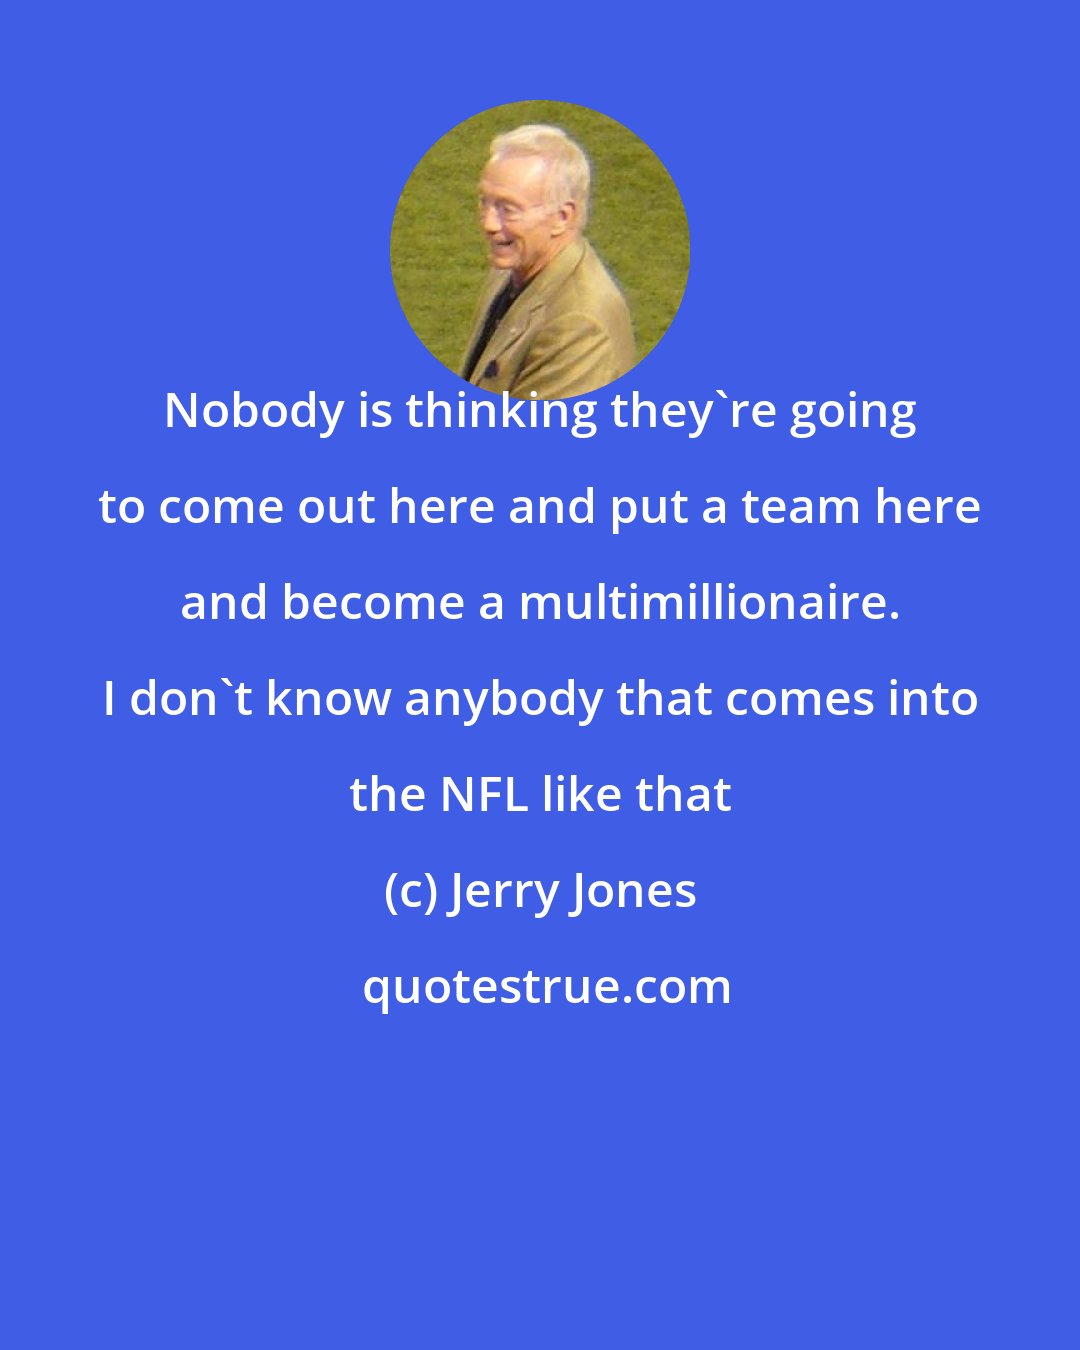 Jerry Jones: Nobody is thinking they're going to come out here and put a team here and become a multimillionaire. I don't know anybody that comes into the NFL like that